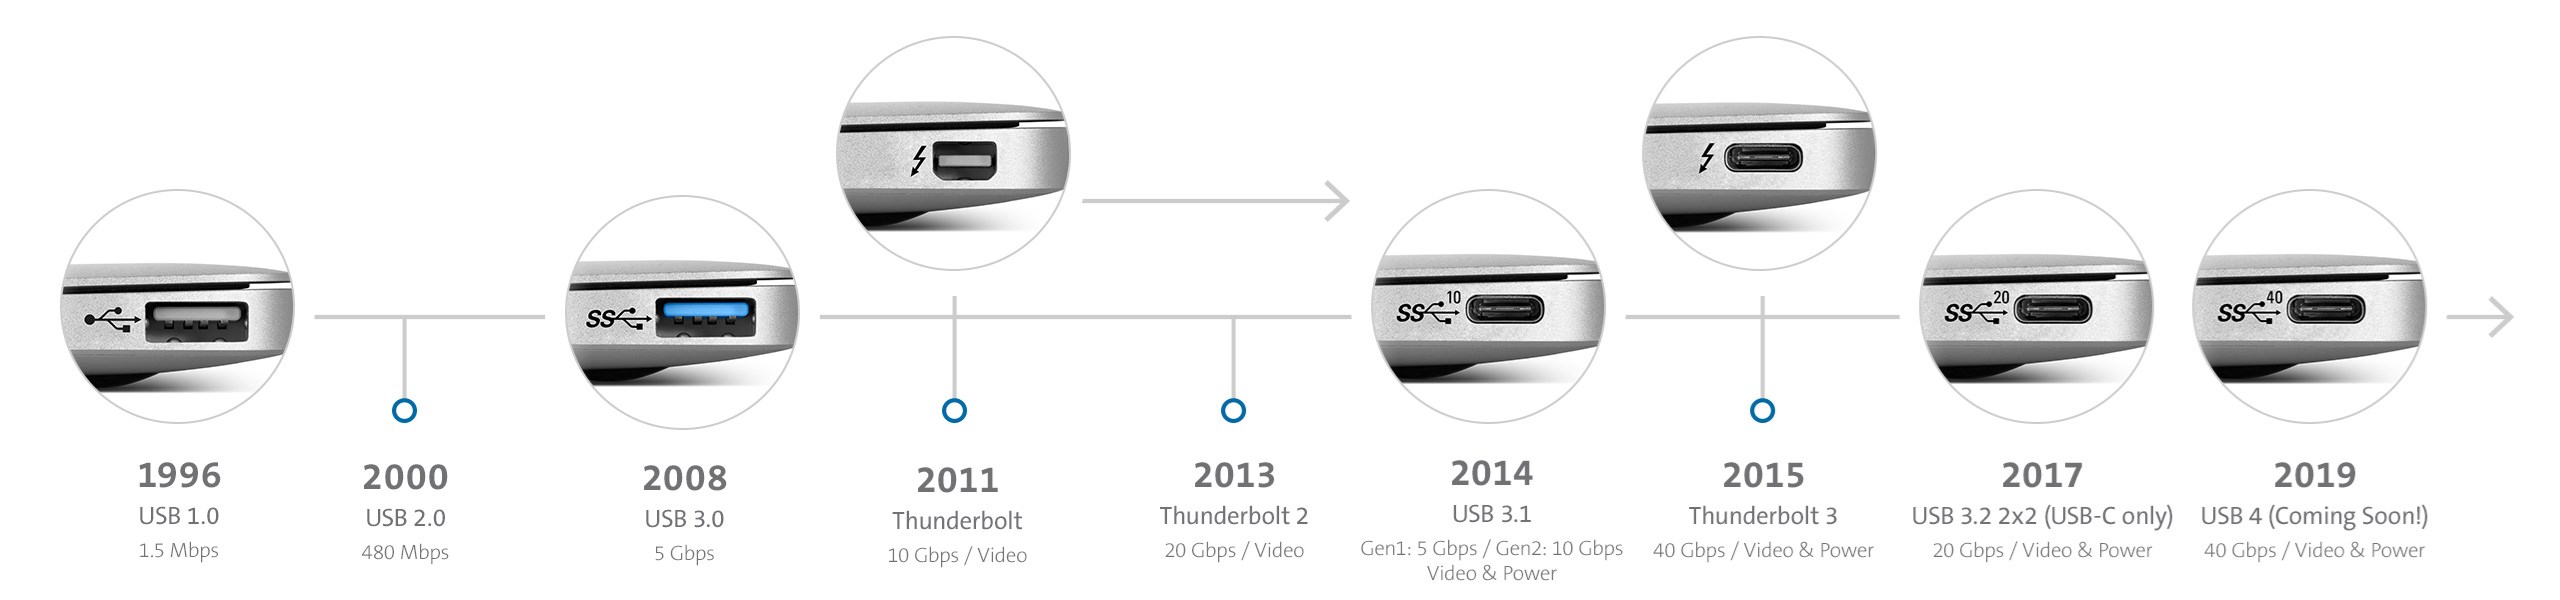 A timeline of USB versions and adaptations